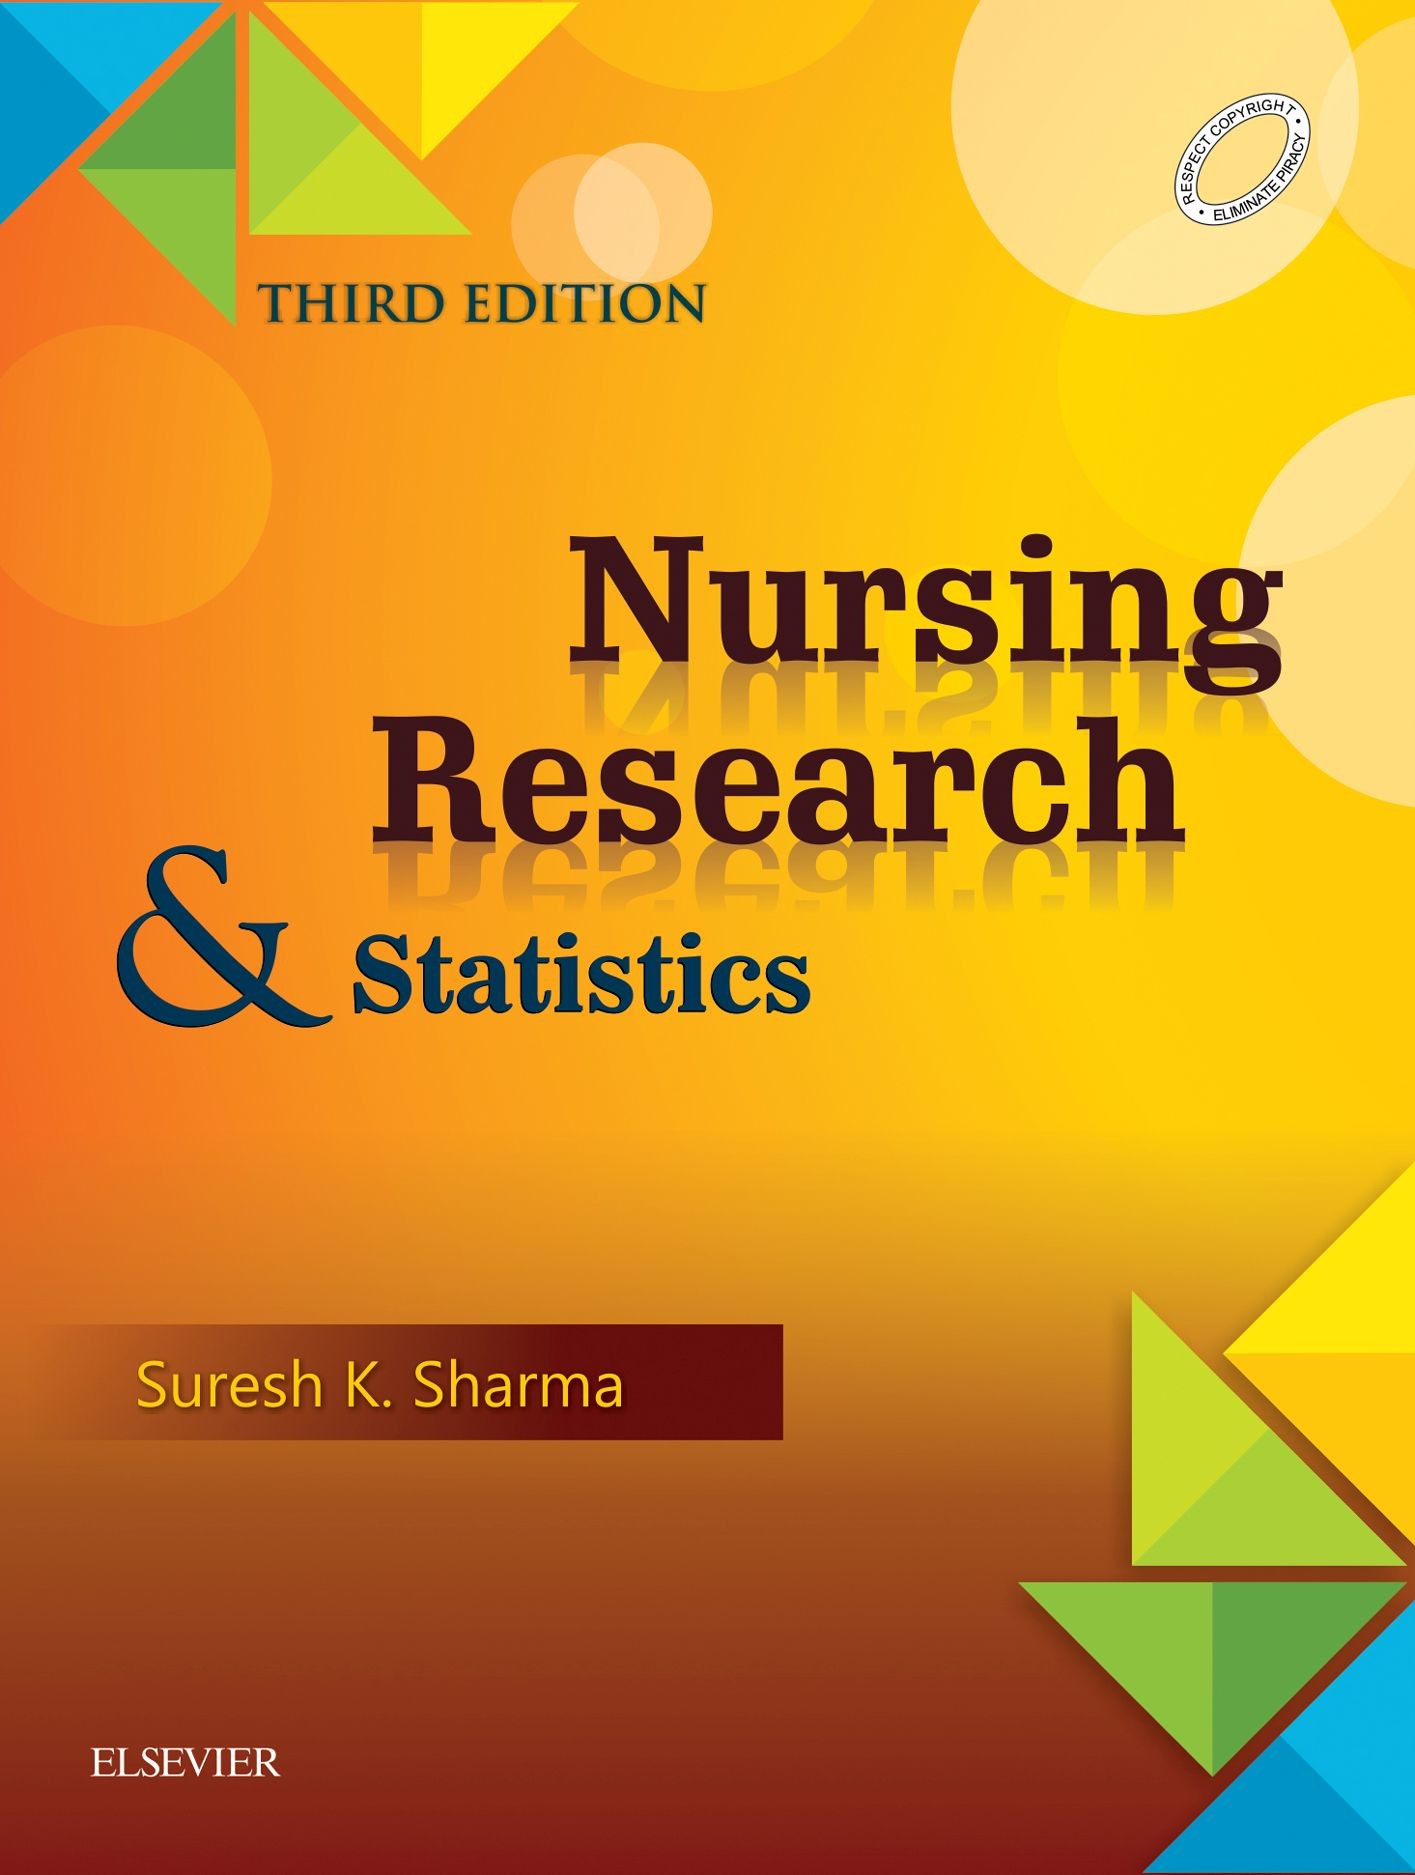 Cover Nursing Research and Statistics